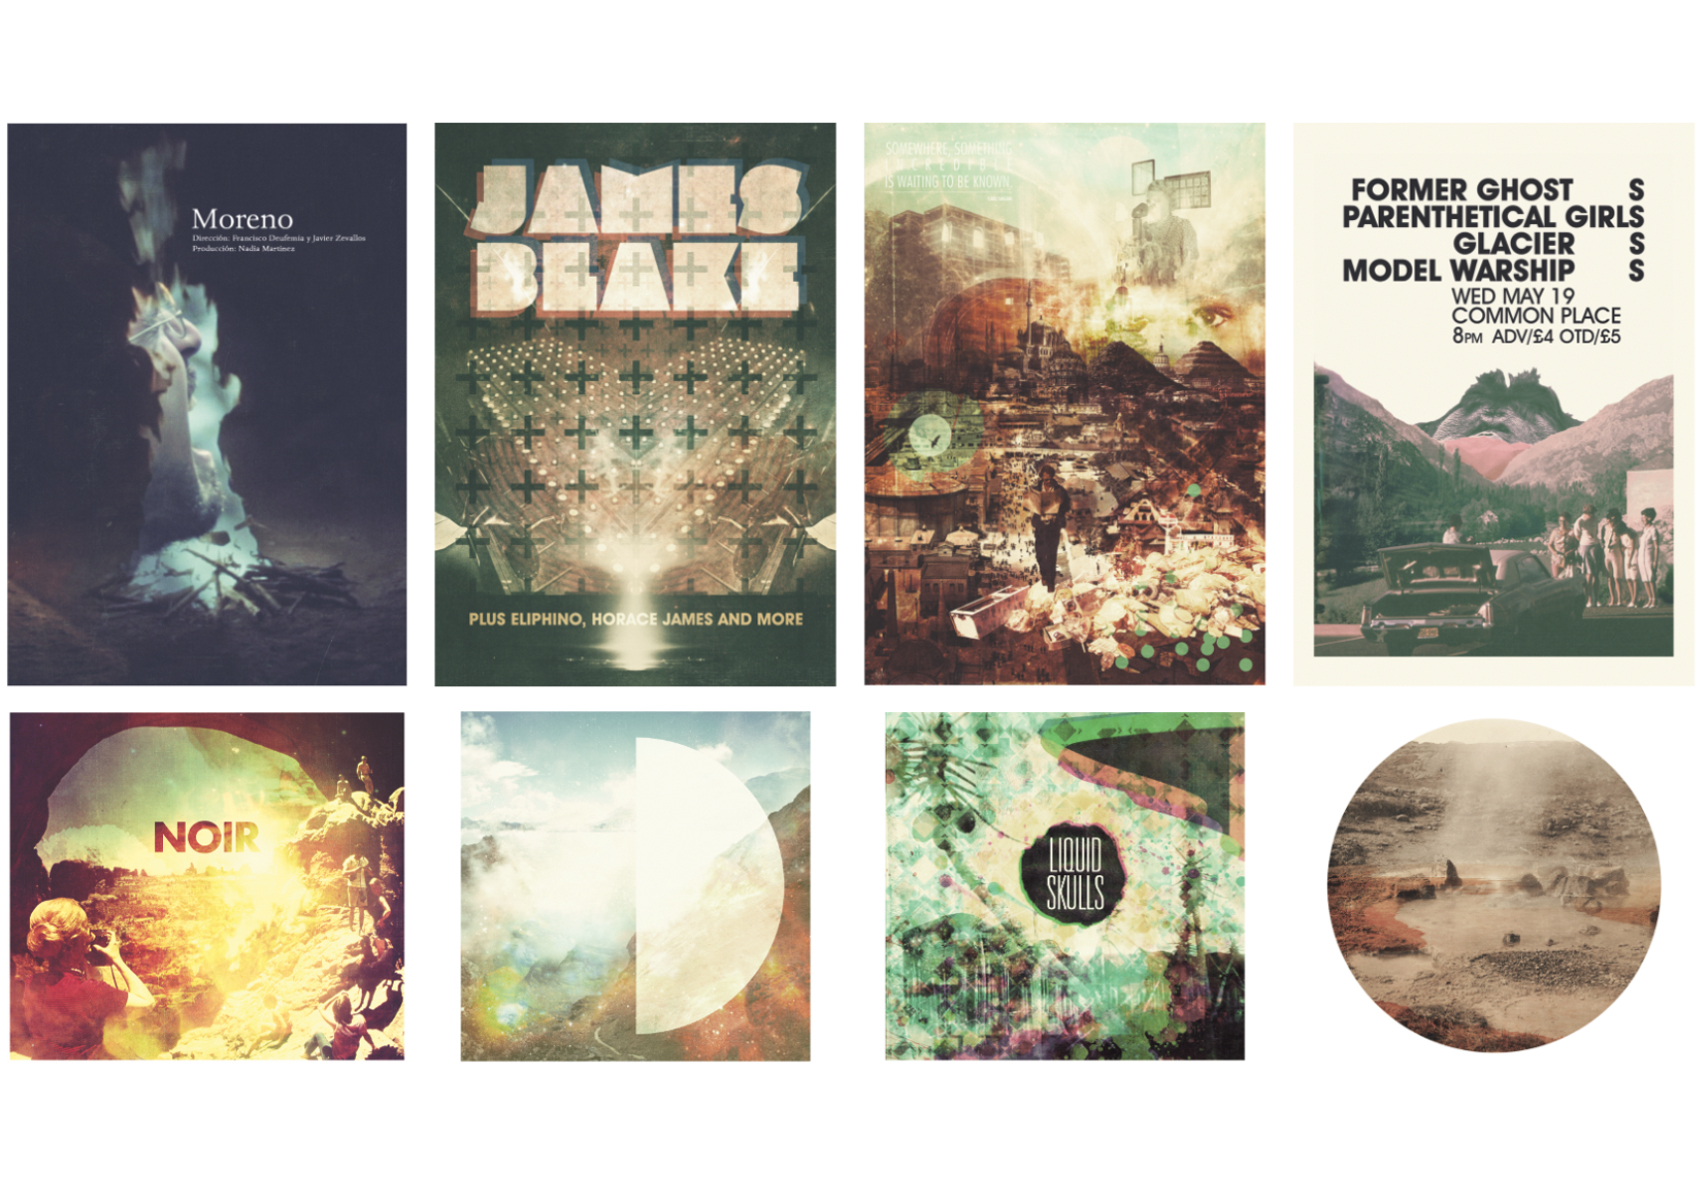 LP covers and Posters